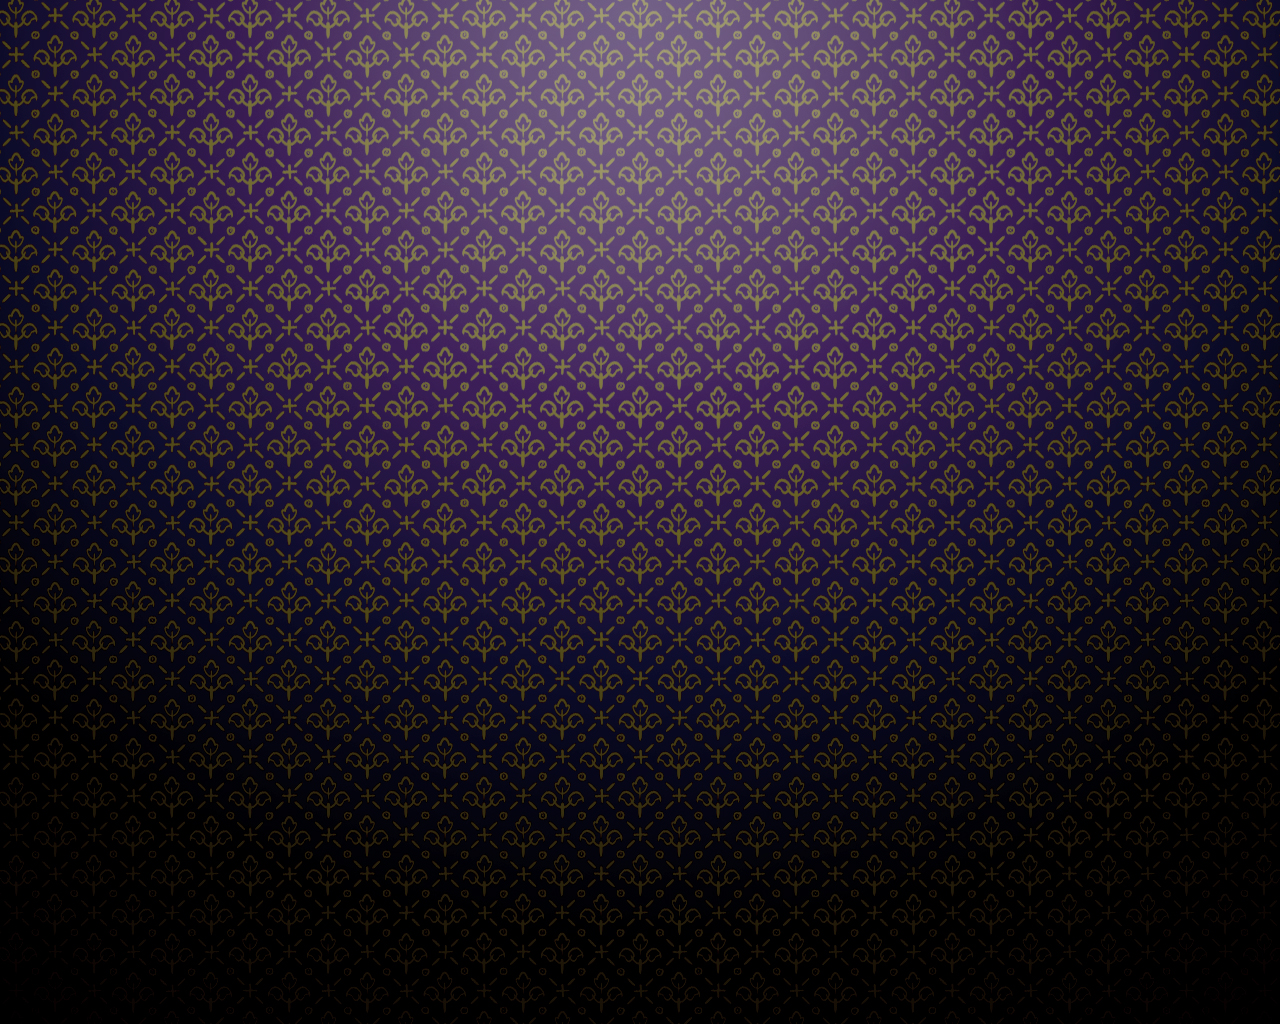 Purple and Gold wallpaper 1280x1024 82334